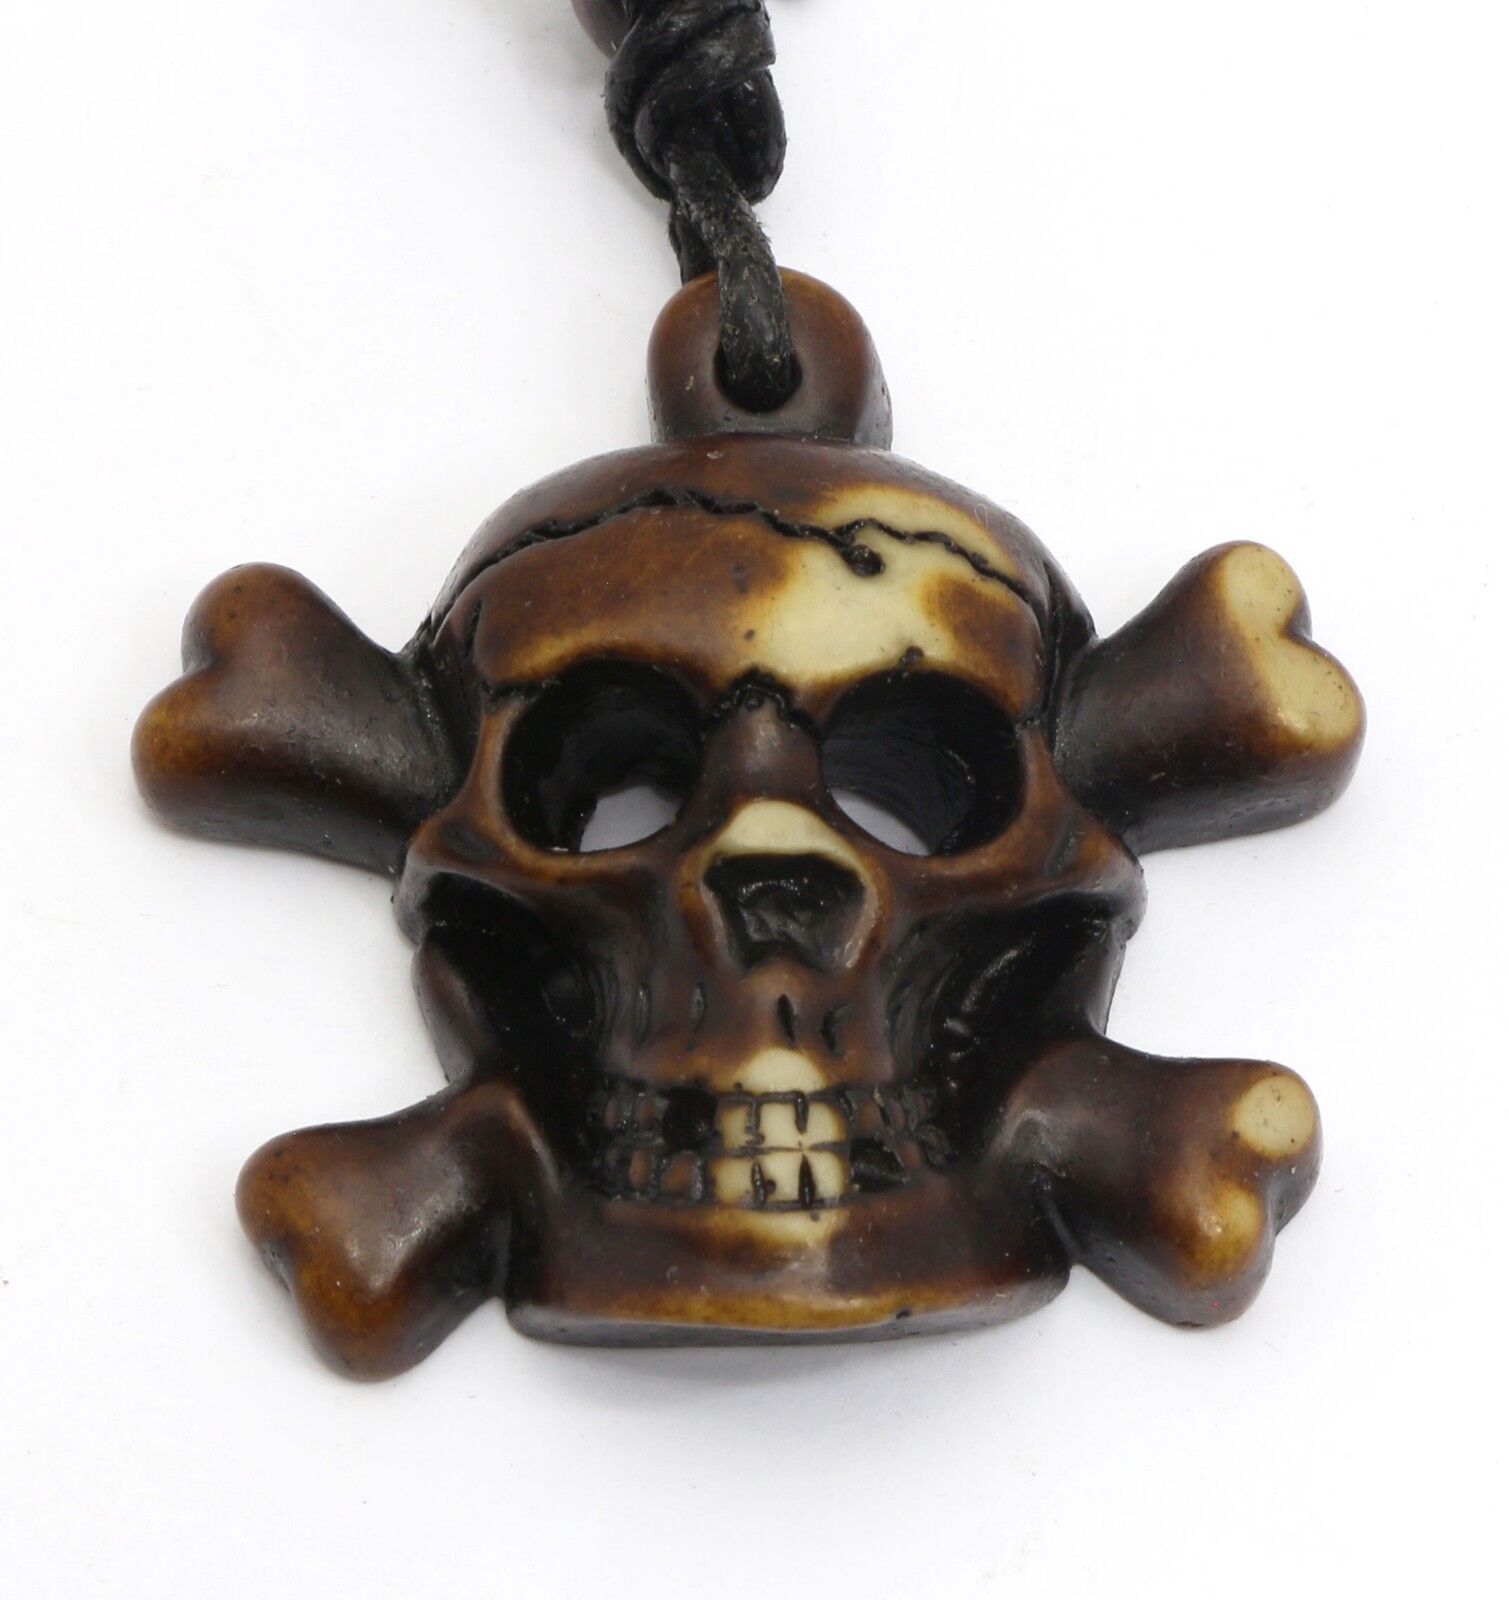 Adjustable Necklace with a Brown Crossbones Pirate Skull Design Tribal Pendant